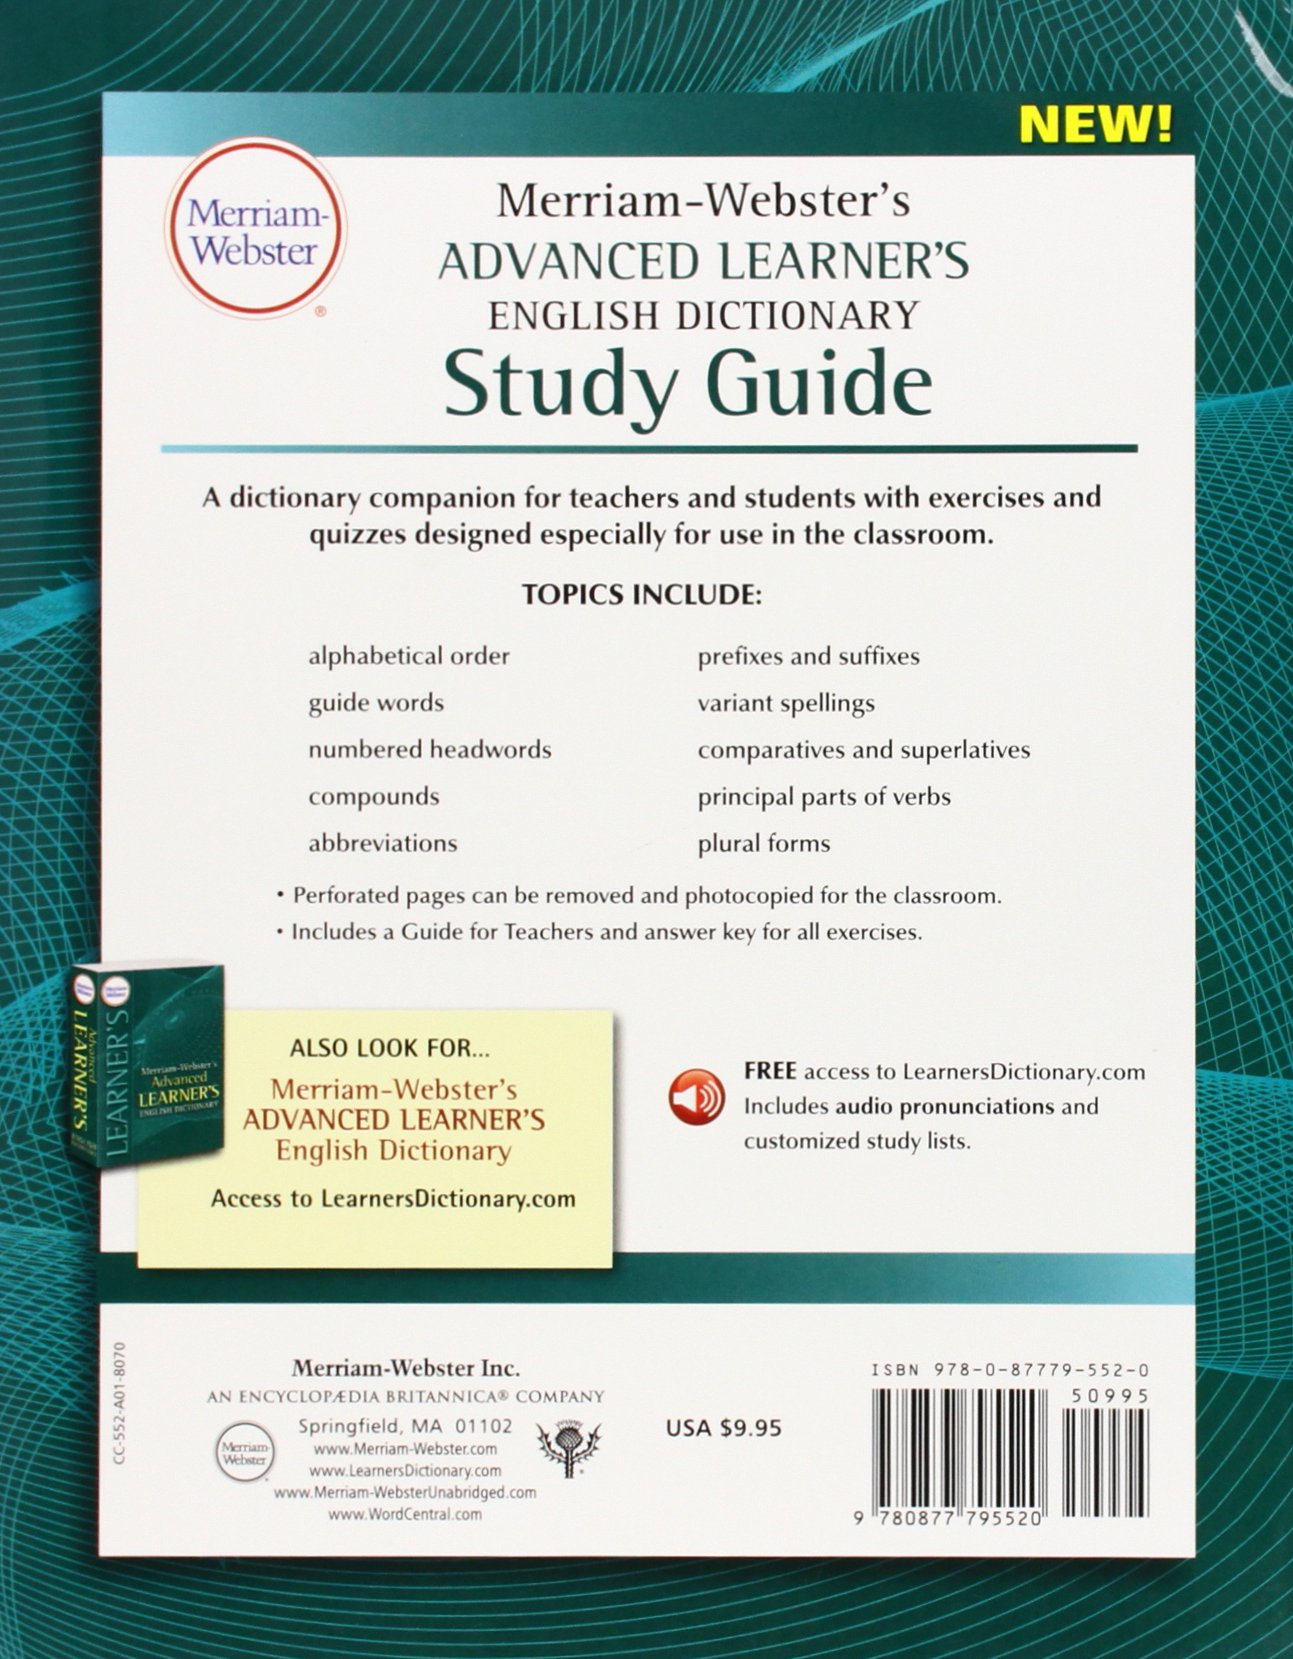 Merriam-Webster's Advanced Learner's English Dictionary. Study Guide |  image1